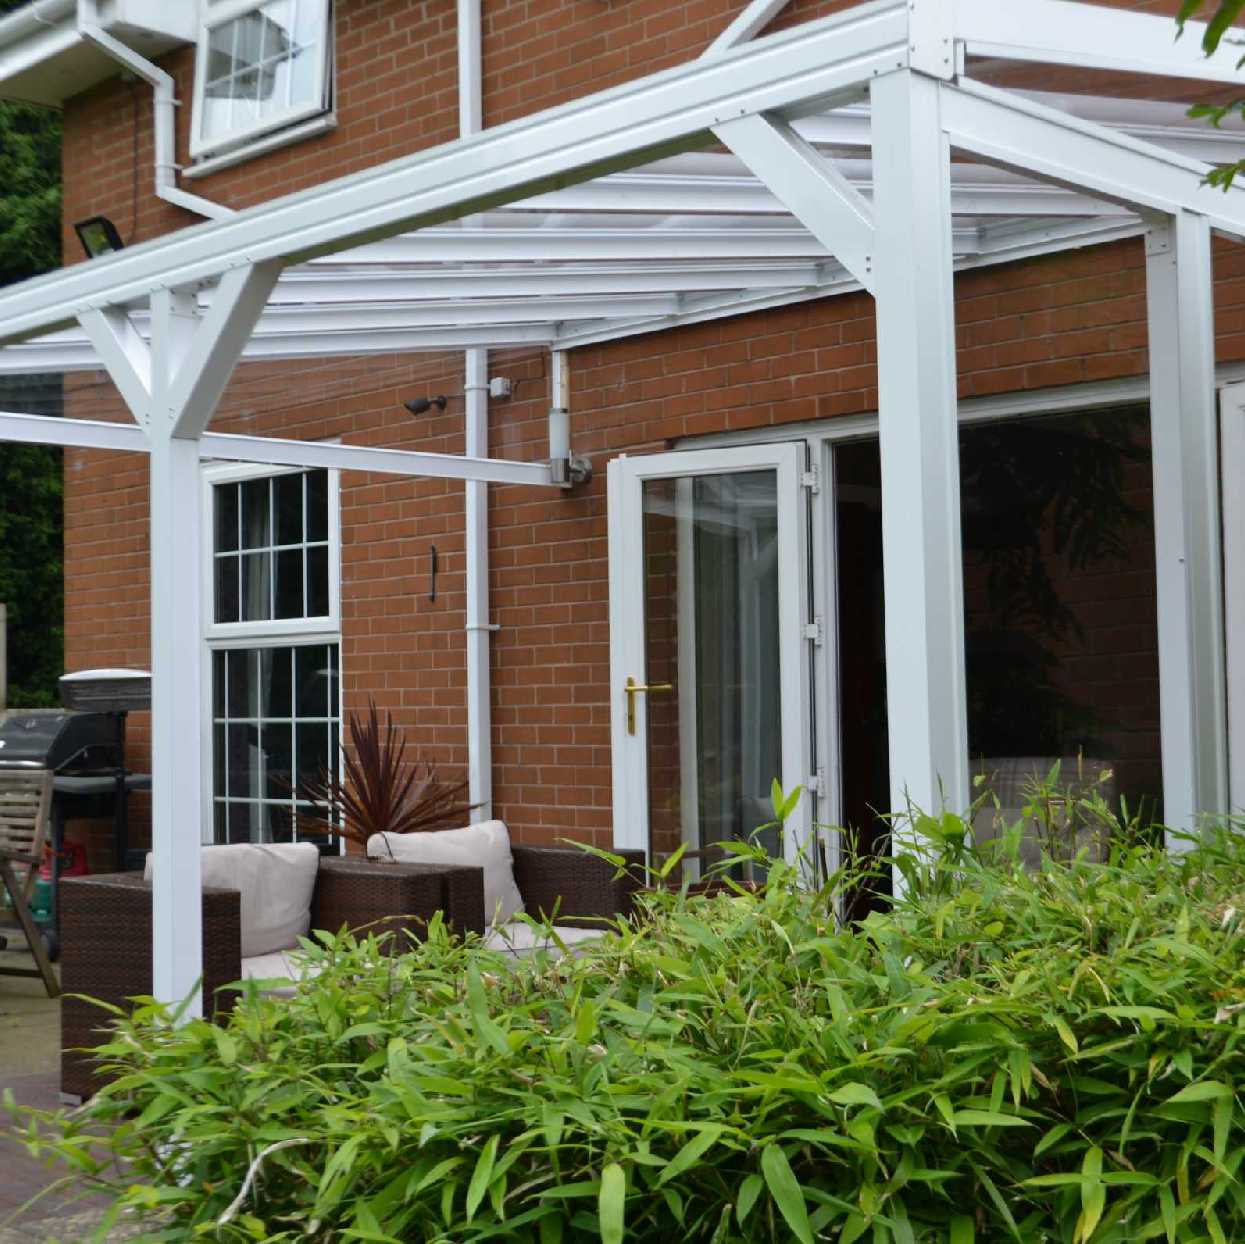 Omega Smart Lean-To Canopy, White UNGLAZED for 6mm Glazing - 8.4m (W) x 2.5m (P), (4) Supporting Posts from Omega Build